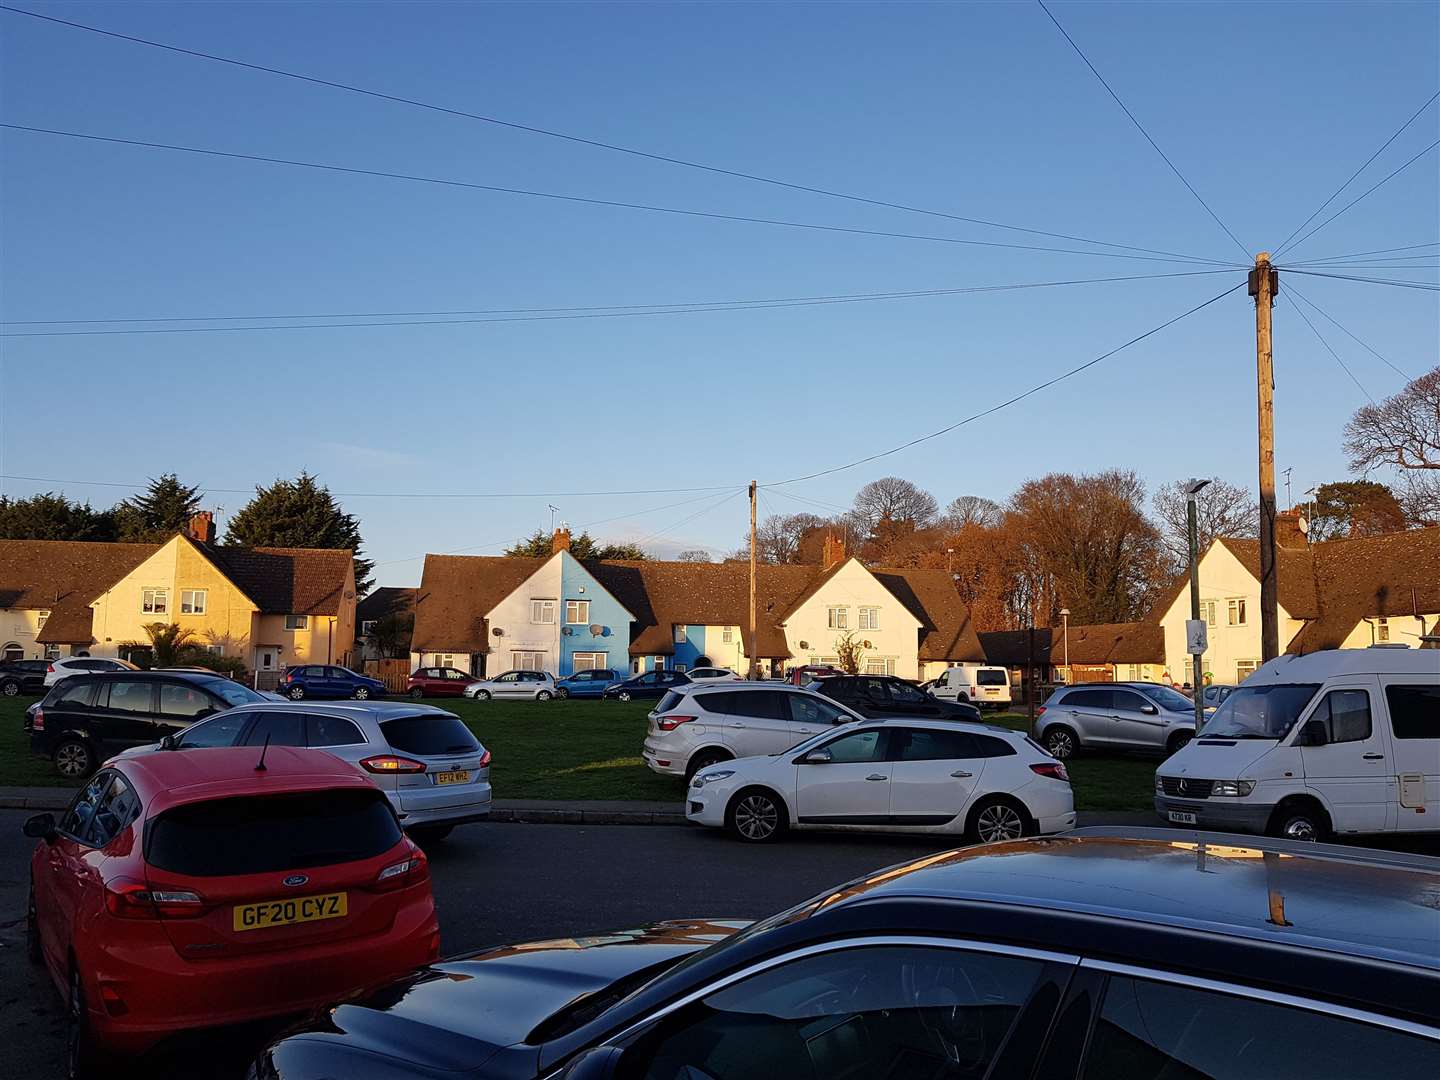 Residents in Greenway, Barming say they are fed up with inconsiderate parking on school pick up and drop off times. Picture: Tammy Jeffery (48693350)